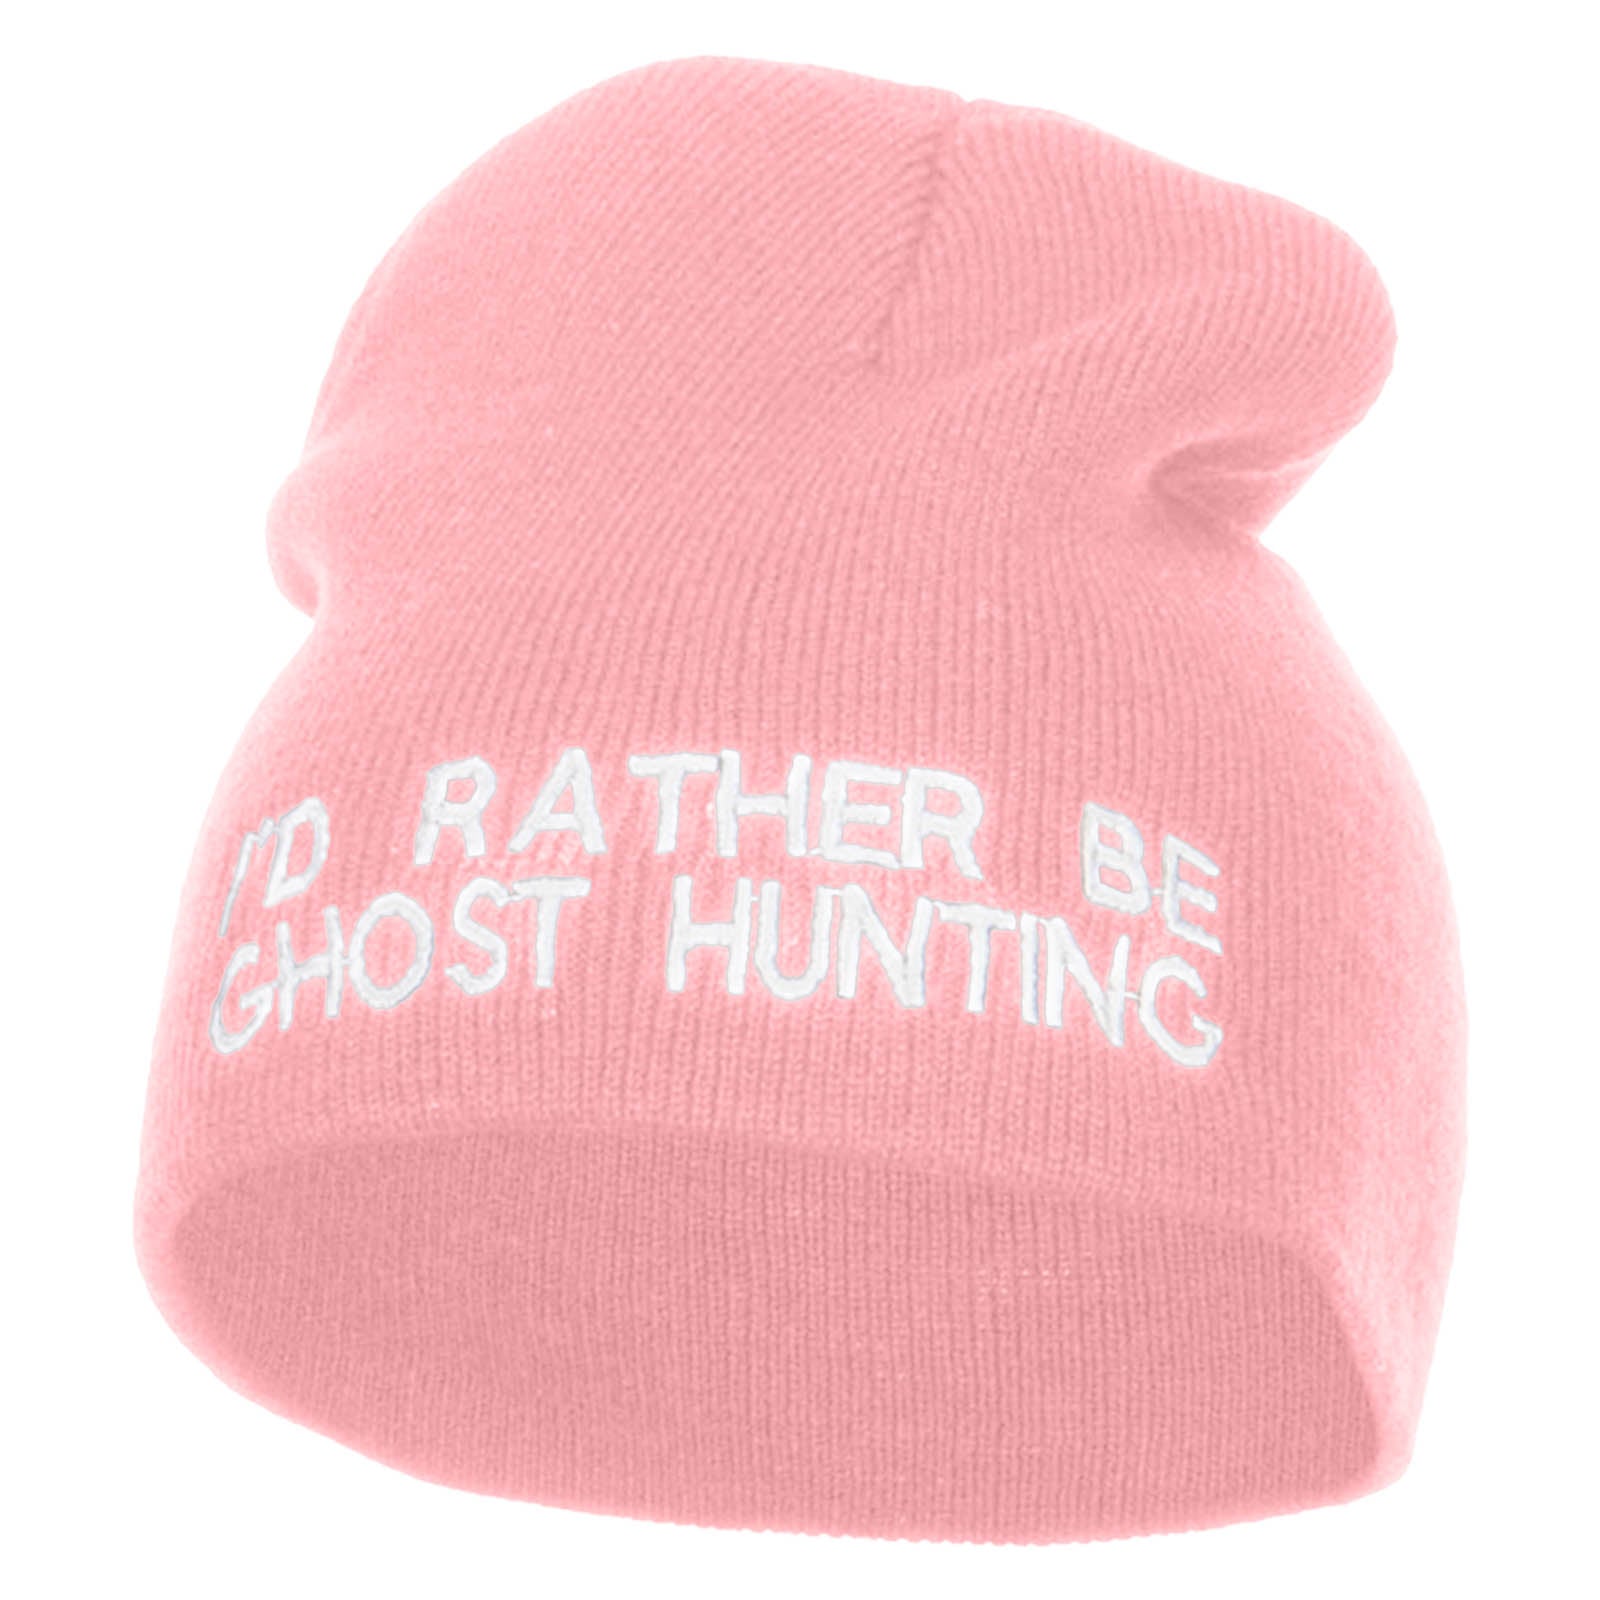 I&#039;d Rather Be Ghost Hunting Short Beanie - Pink OSFM